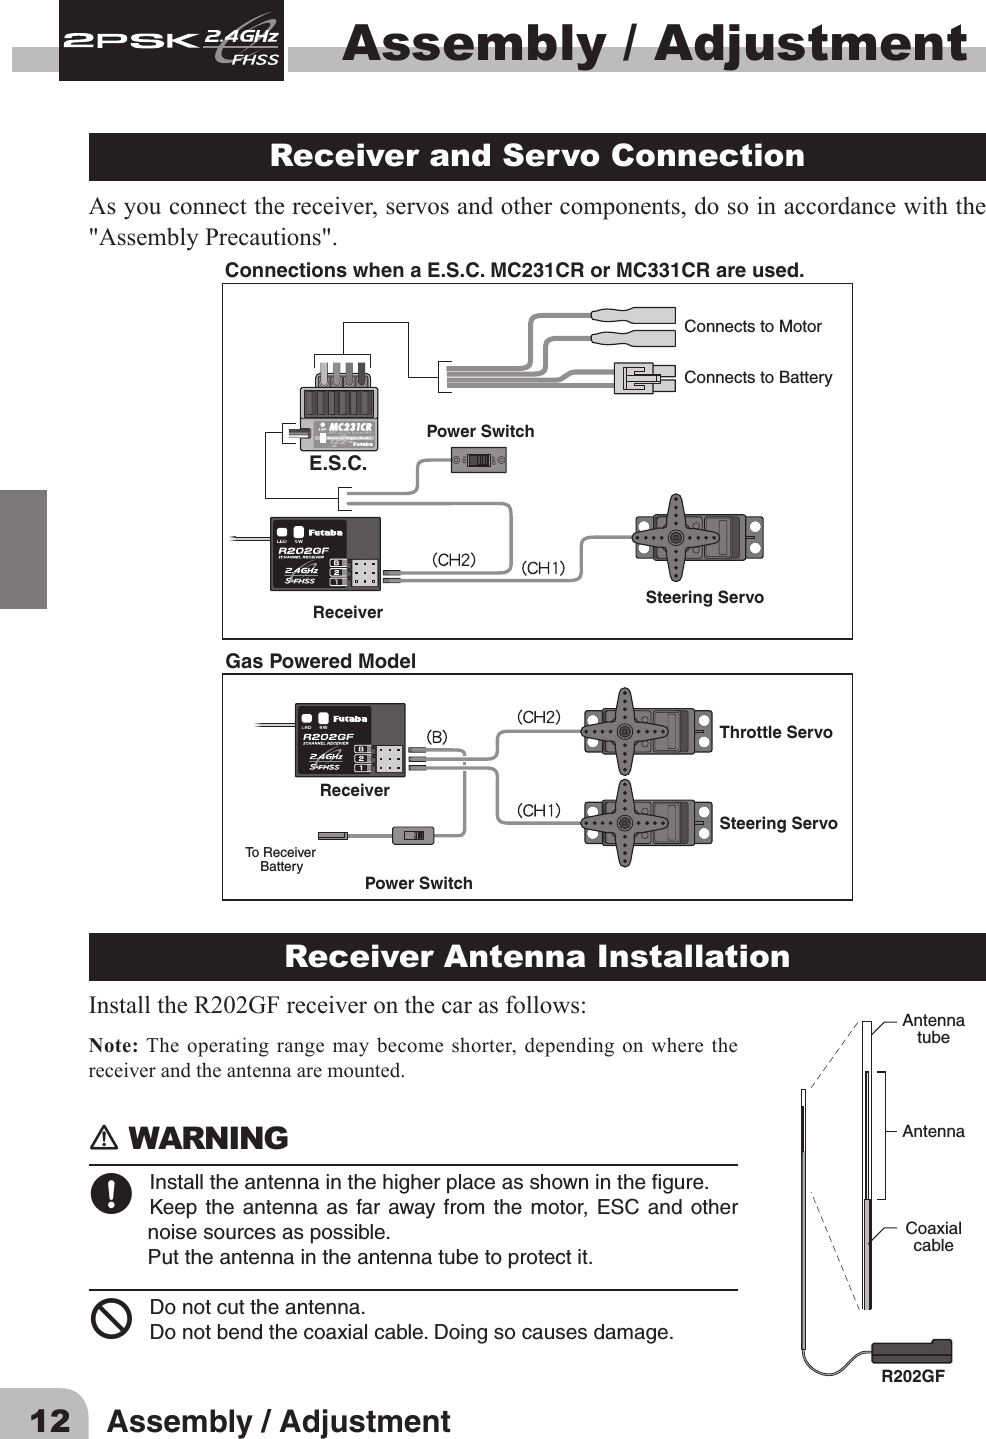 12 Assembly / AdjustmentAssembly / Adjustment Receiver and Servo Connection As you connect the receiver, servos and other components, do so in accordance with the &quot;Assembly Precautions&quot;. Connections when a E.S.C. MC231CR or MC331CR are used.Steering ServoThrottle ServoReceiverReceiverPower SwitchTo Receiver    BatterySteering ServoE.S.C.Power SwitchConnects to MotorConnects to BatteryGas Powered ModelReceiver Antenna InstallationInstalltheR202GFreceiveronthecarasfollows:Note: The operating range may become shorter, depending on where the receiver and the antenna are mounted.󾛽WARNING 󾛹Installtheantennainthehigherplaceasshowninthegure.Keepthe antenna as farawayfrom the motor,ESC and othernoisesourcesaspossible.Puttheantennaintheantennatubetoprotectit.󾙍Donotcuttheantenna.Donotbendthecoaxialcable.Doingsocausesdamage.AntennatubeAntennaCoaxialcableR202GF